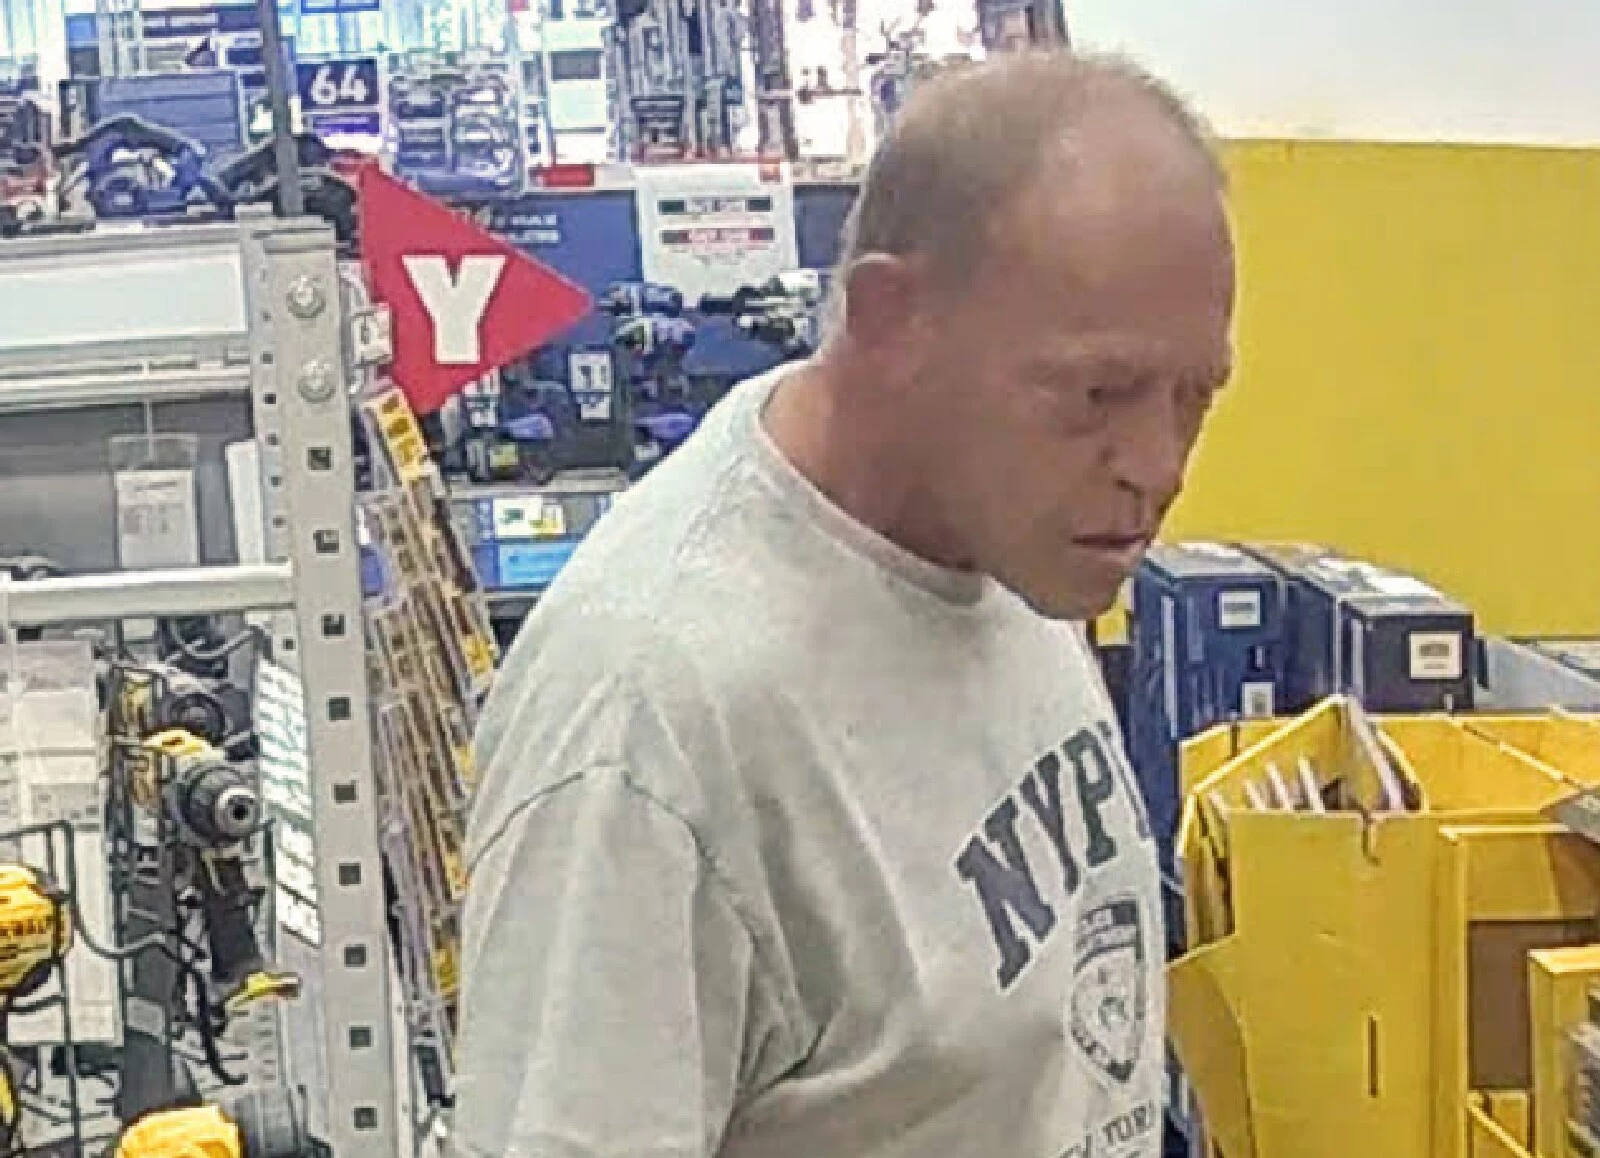 Brandy Lowe Sex Video - Gloucester Twp NJ Police Search for Lowe's Power Tool Thief